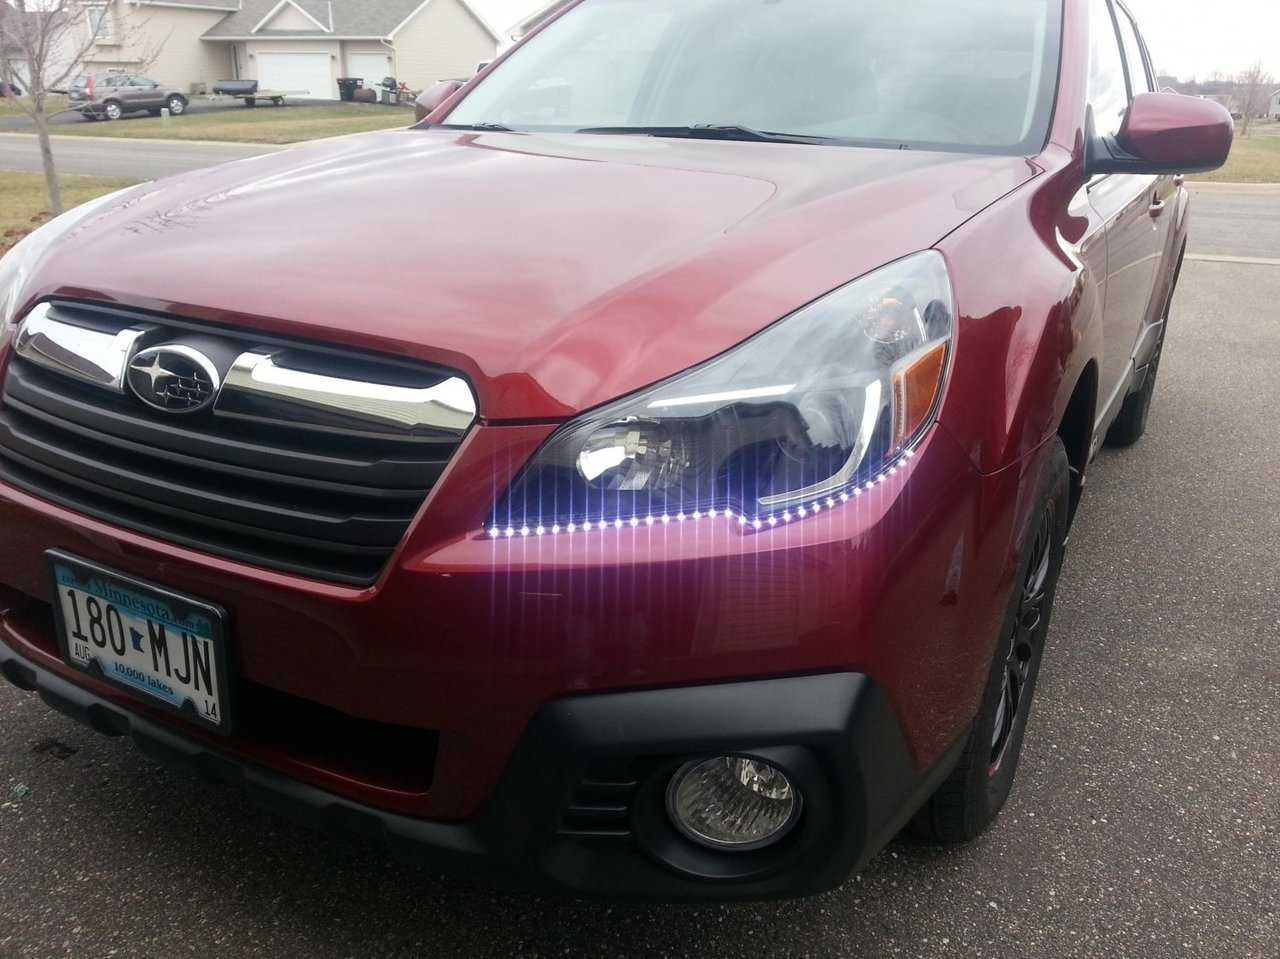 LED DRL Head Light Strips Daytime Running Lamps for 2009-2013 Subaru Forester